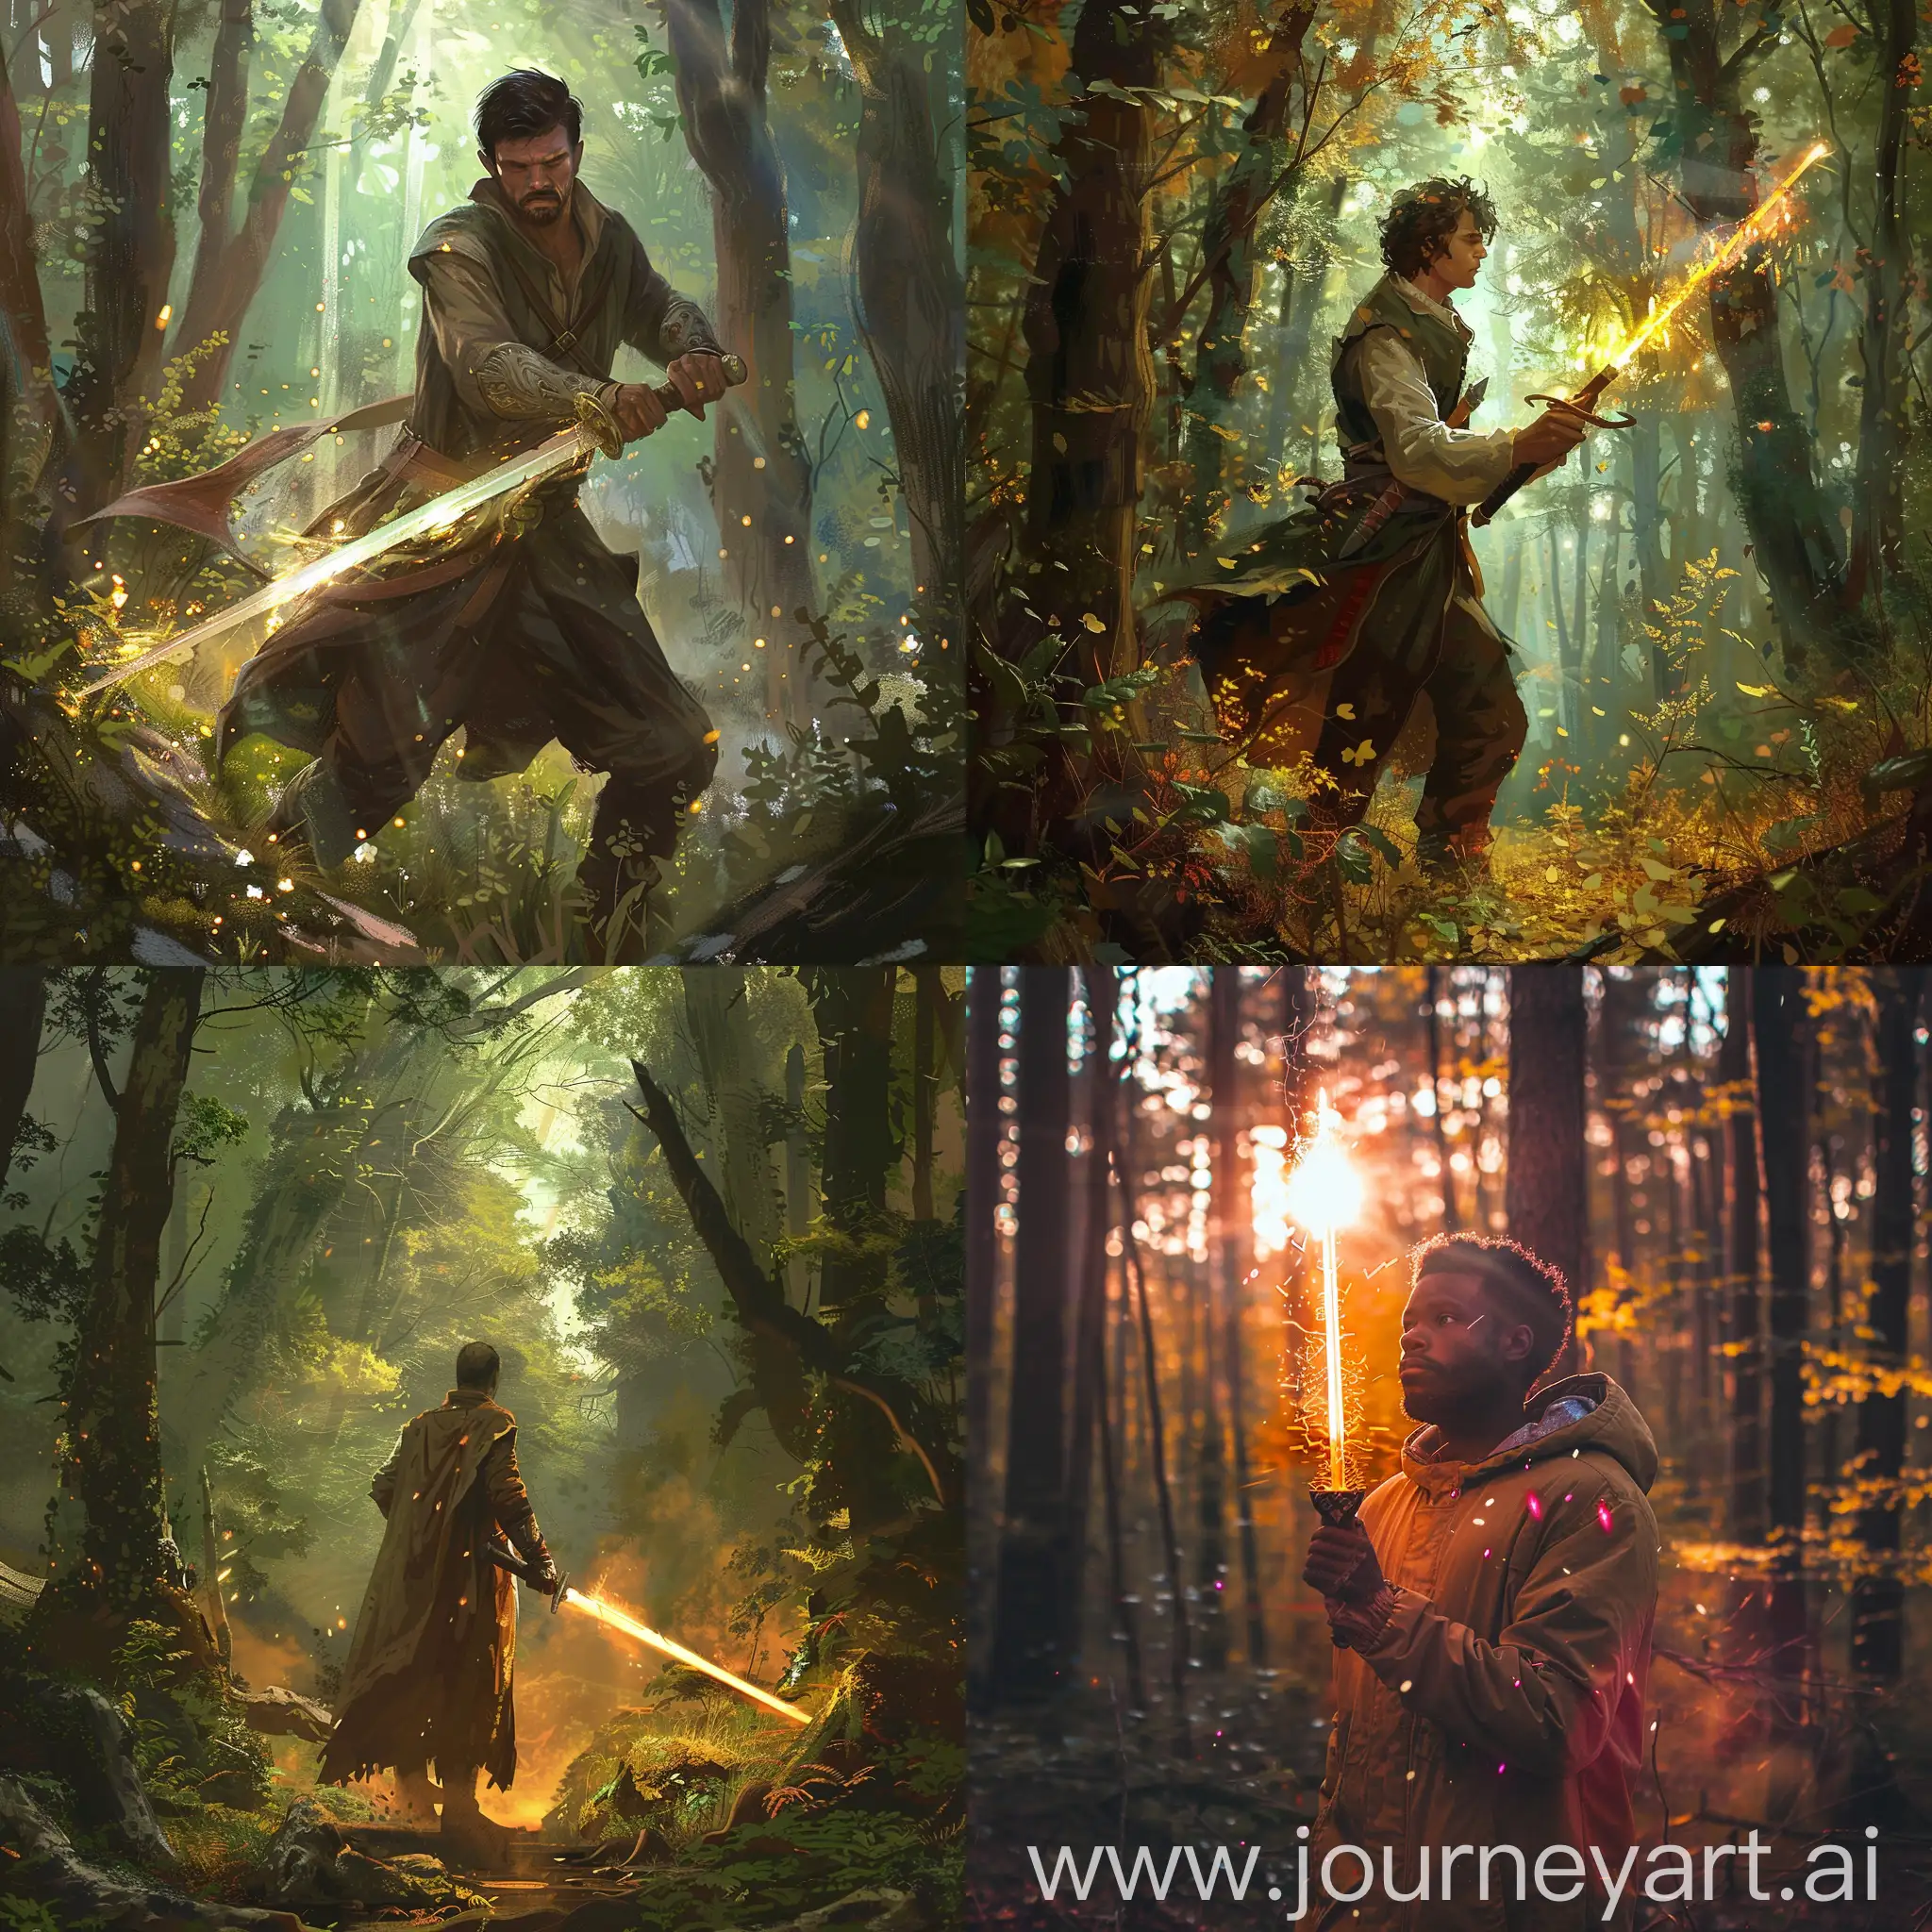 Heroic-Warrior-Wielding-Enchanted-Blade-in-Mystical-Forest